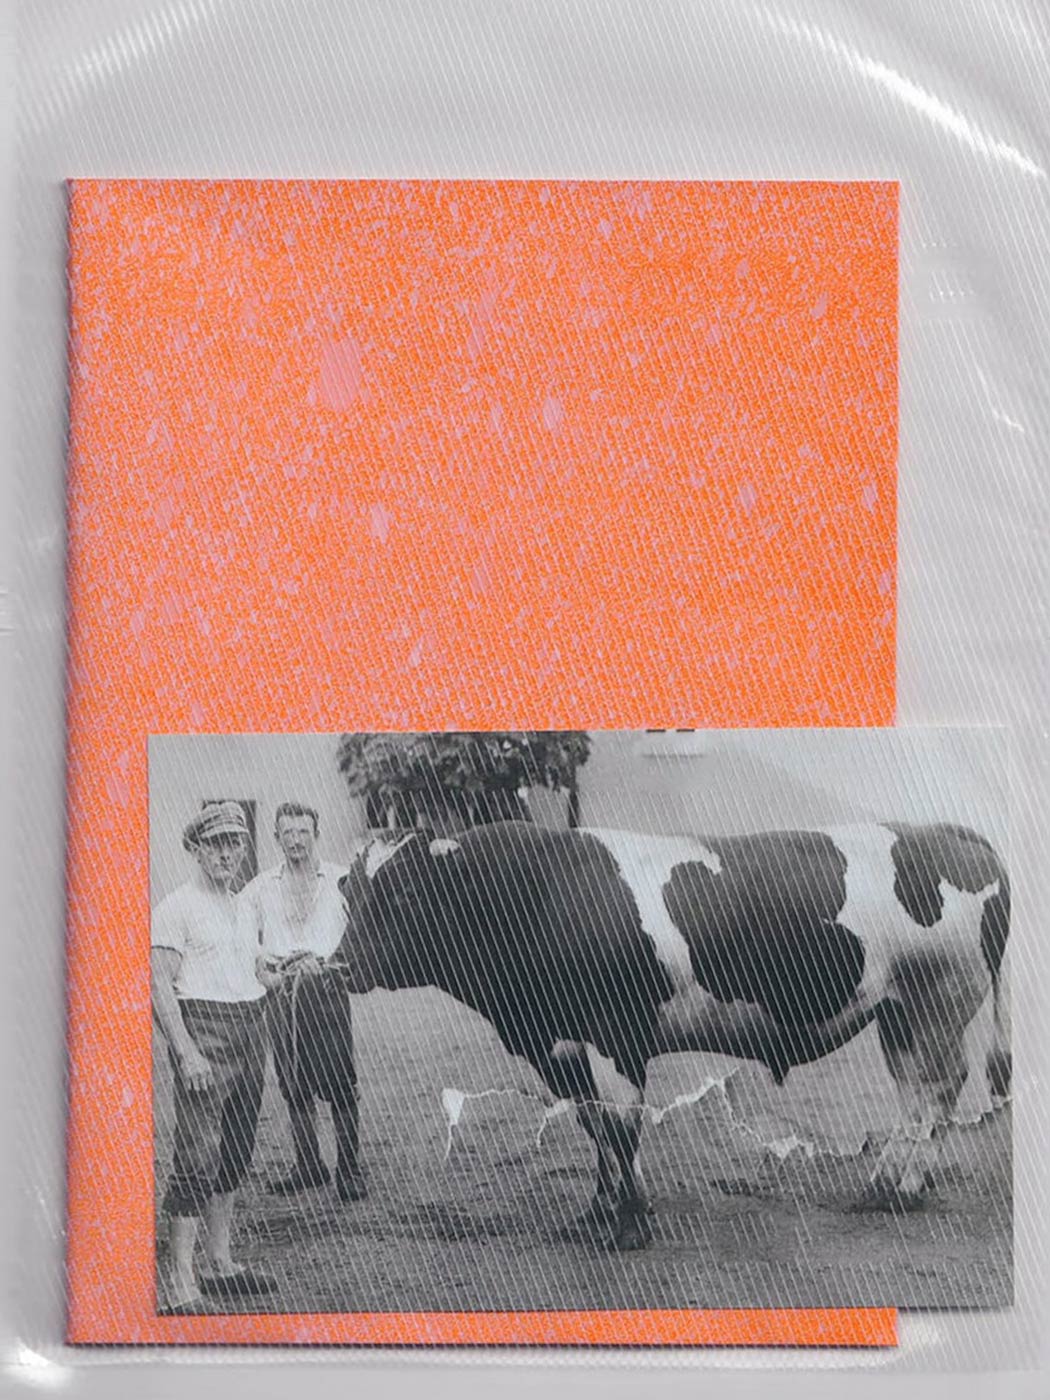 A booklet with an orange cover, surrounded by a sturdy plastic film, in front of the booklet is a contact sheet showing two young men with an ox.